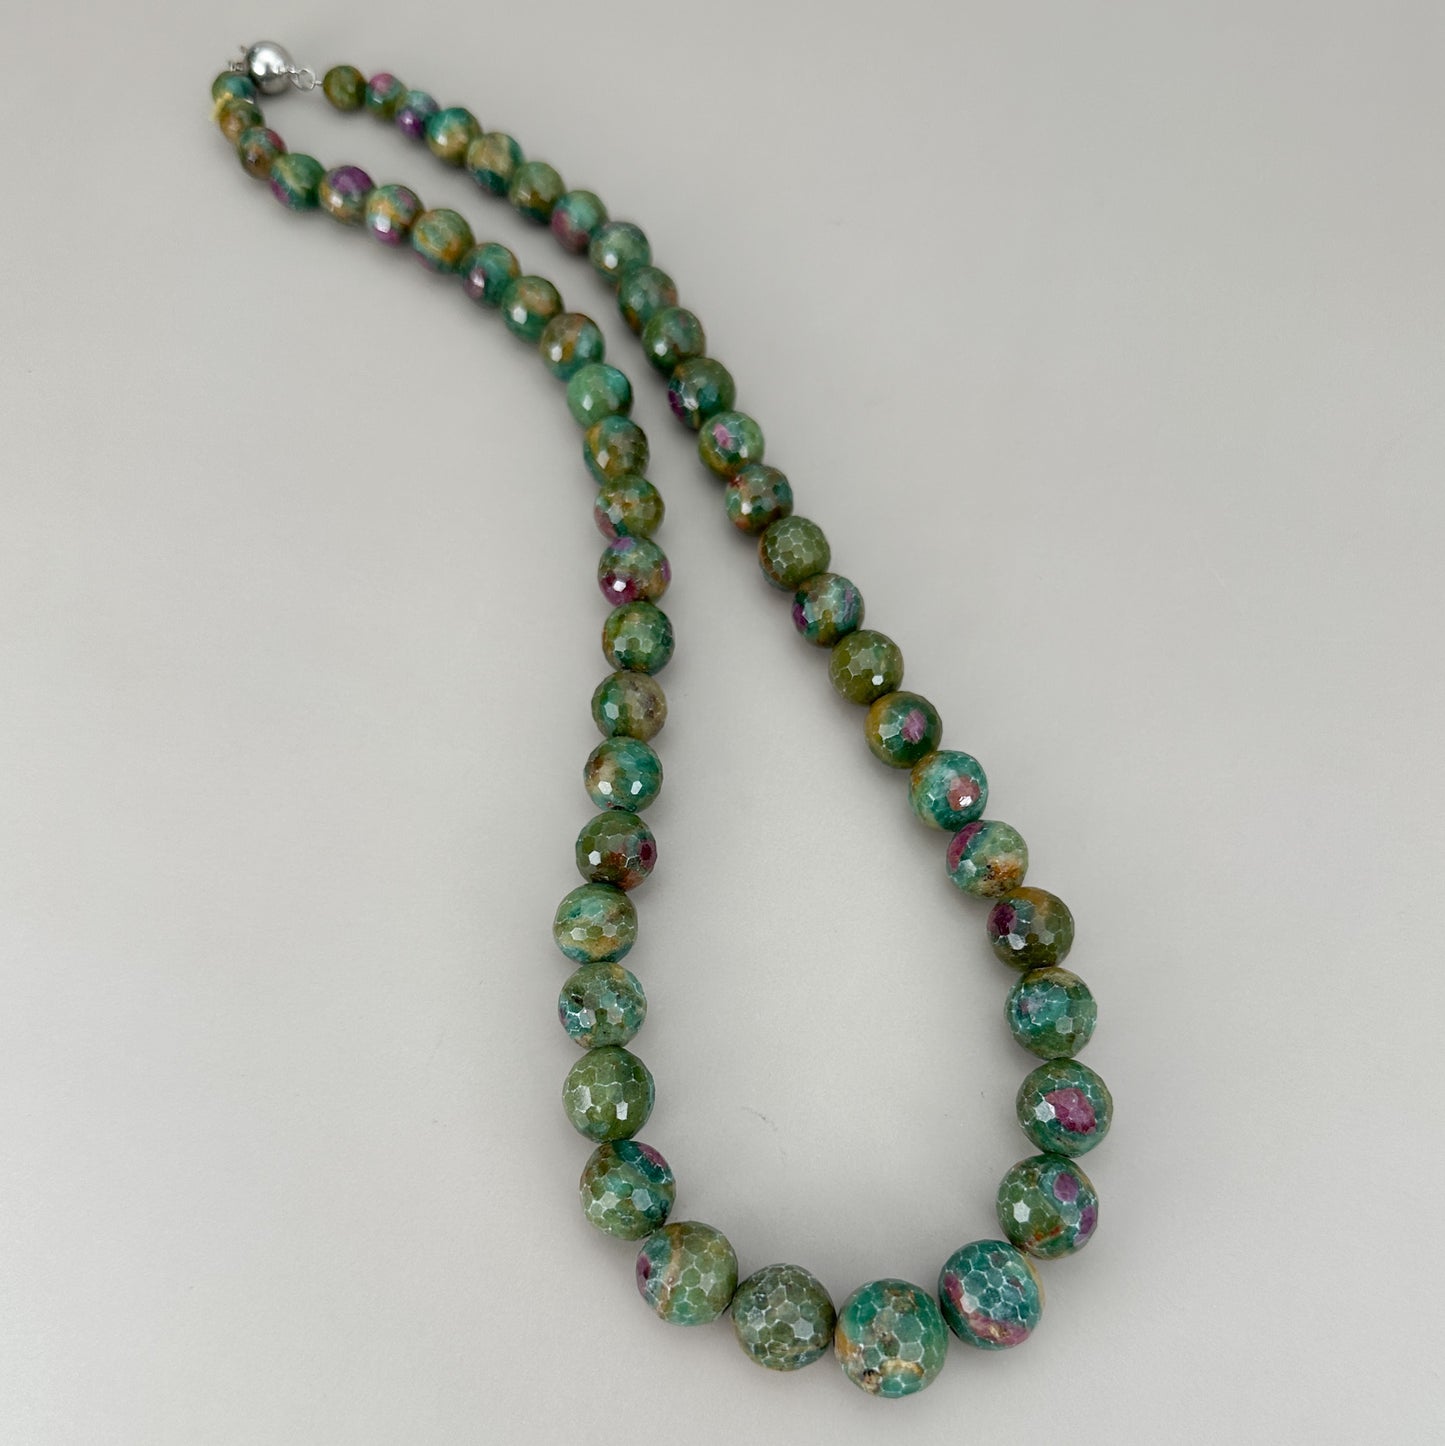 Ruby in Zoisite 6-12mm Faceted Graduated Round Bead Necklace - 1 pc. (J229)